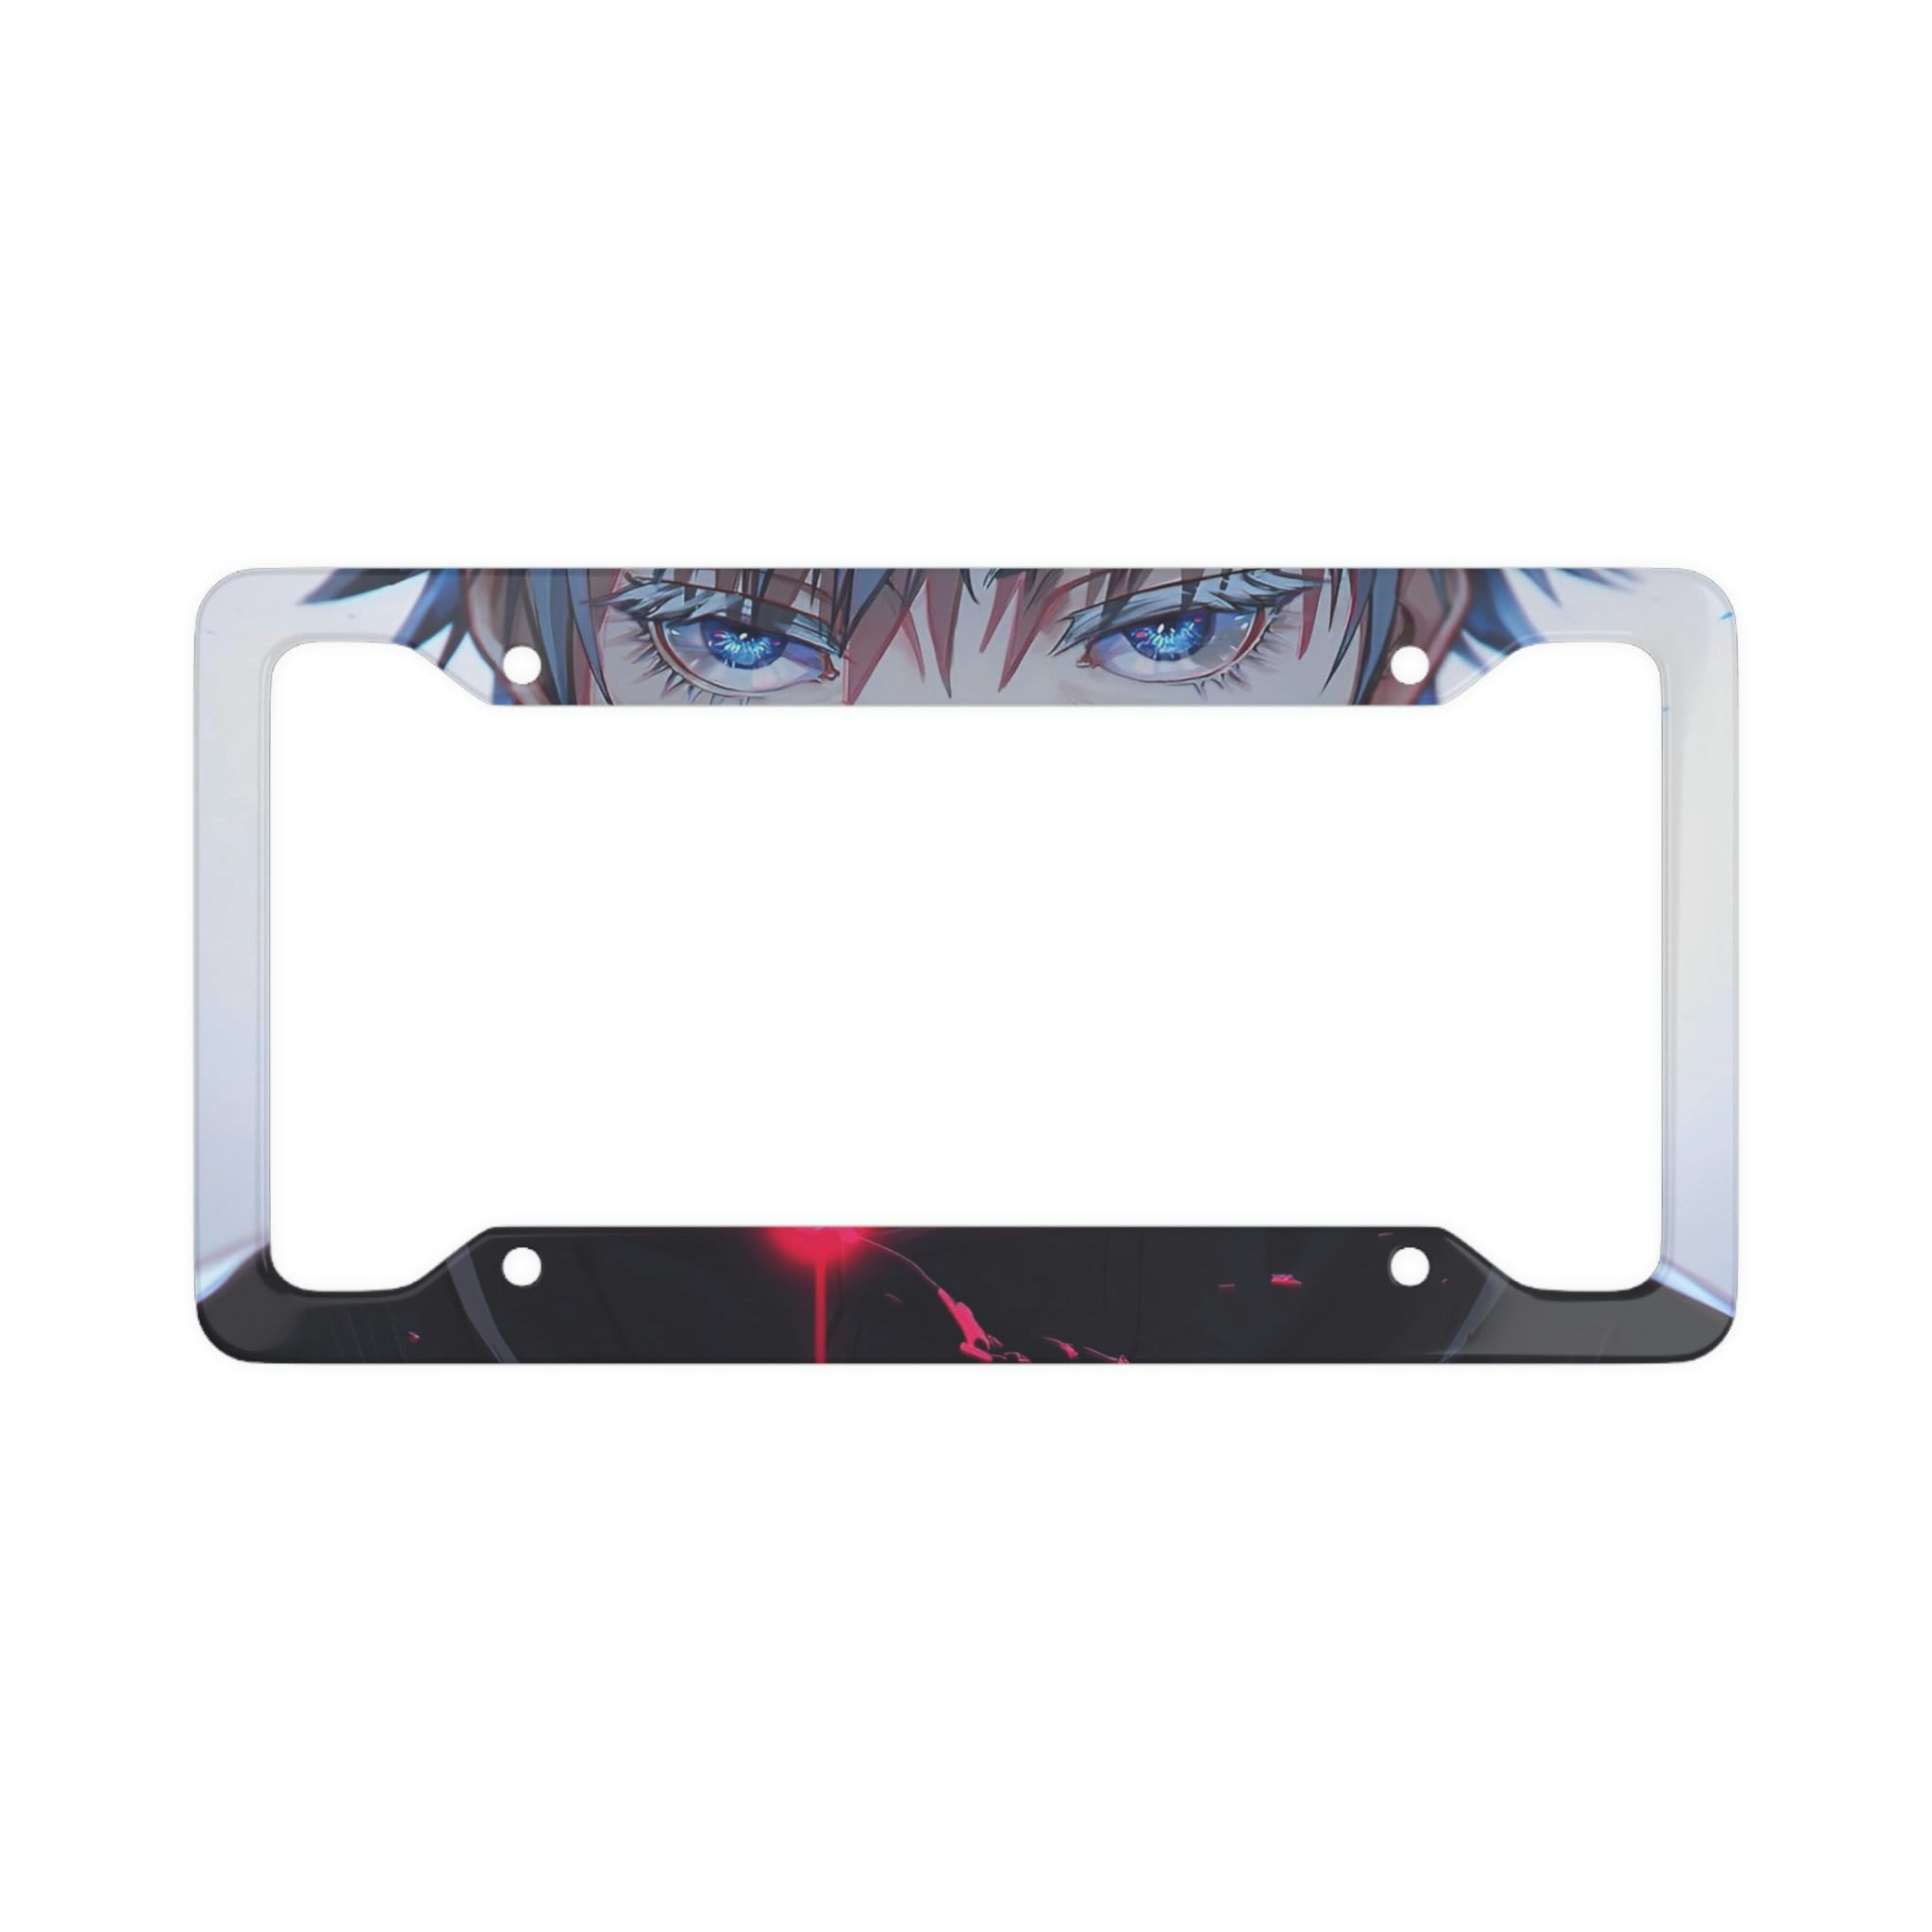 DCARSETCV Anime License Plate Frames 2 Pack Aluminum Universal Round Hole Car  License Plate Covers RustProof License Plate Holder with Screws and Screw  Caps Anime One Size DCAPLMPERL911  Walmartcom